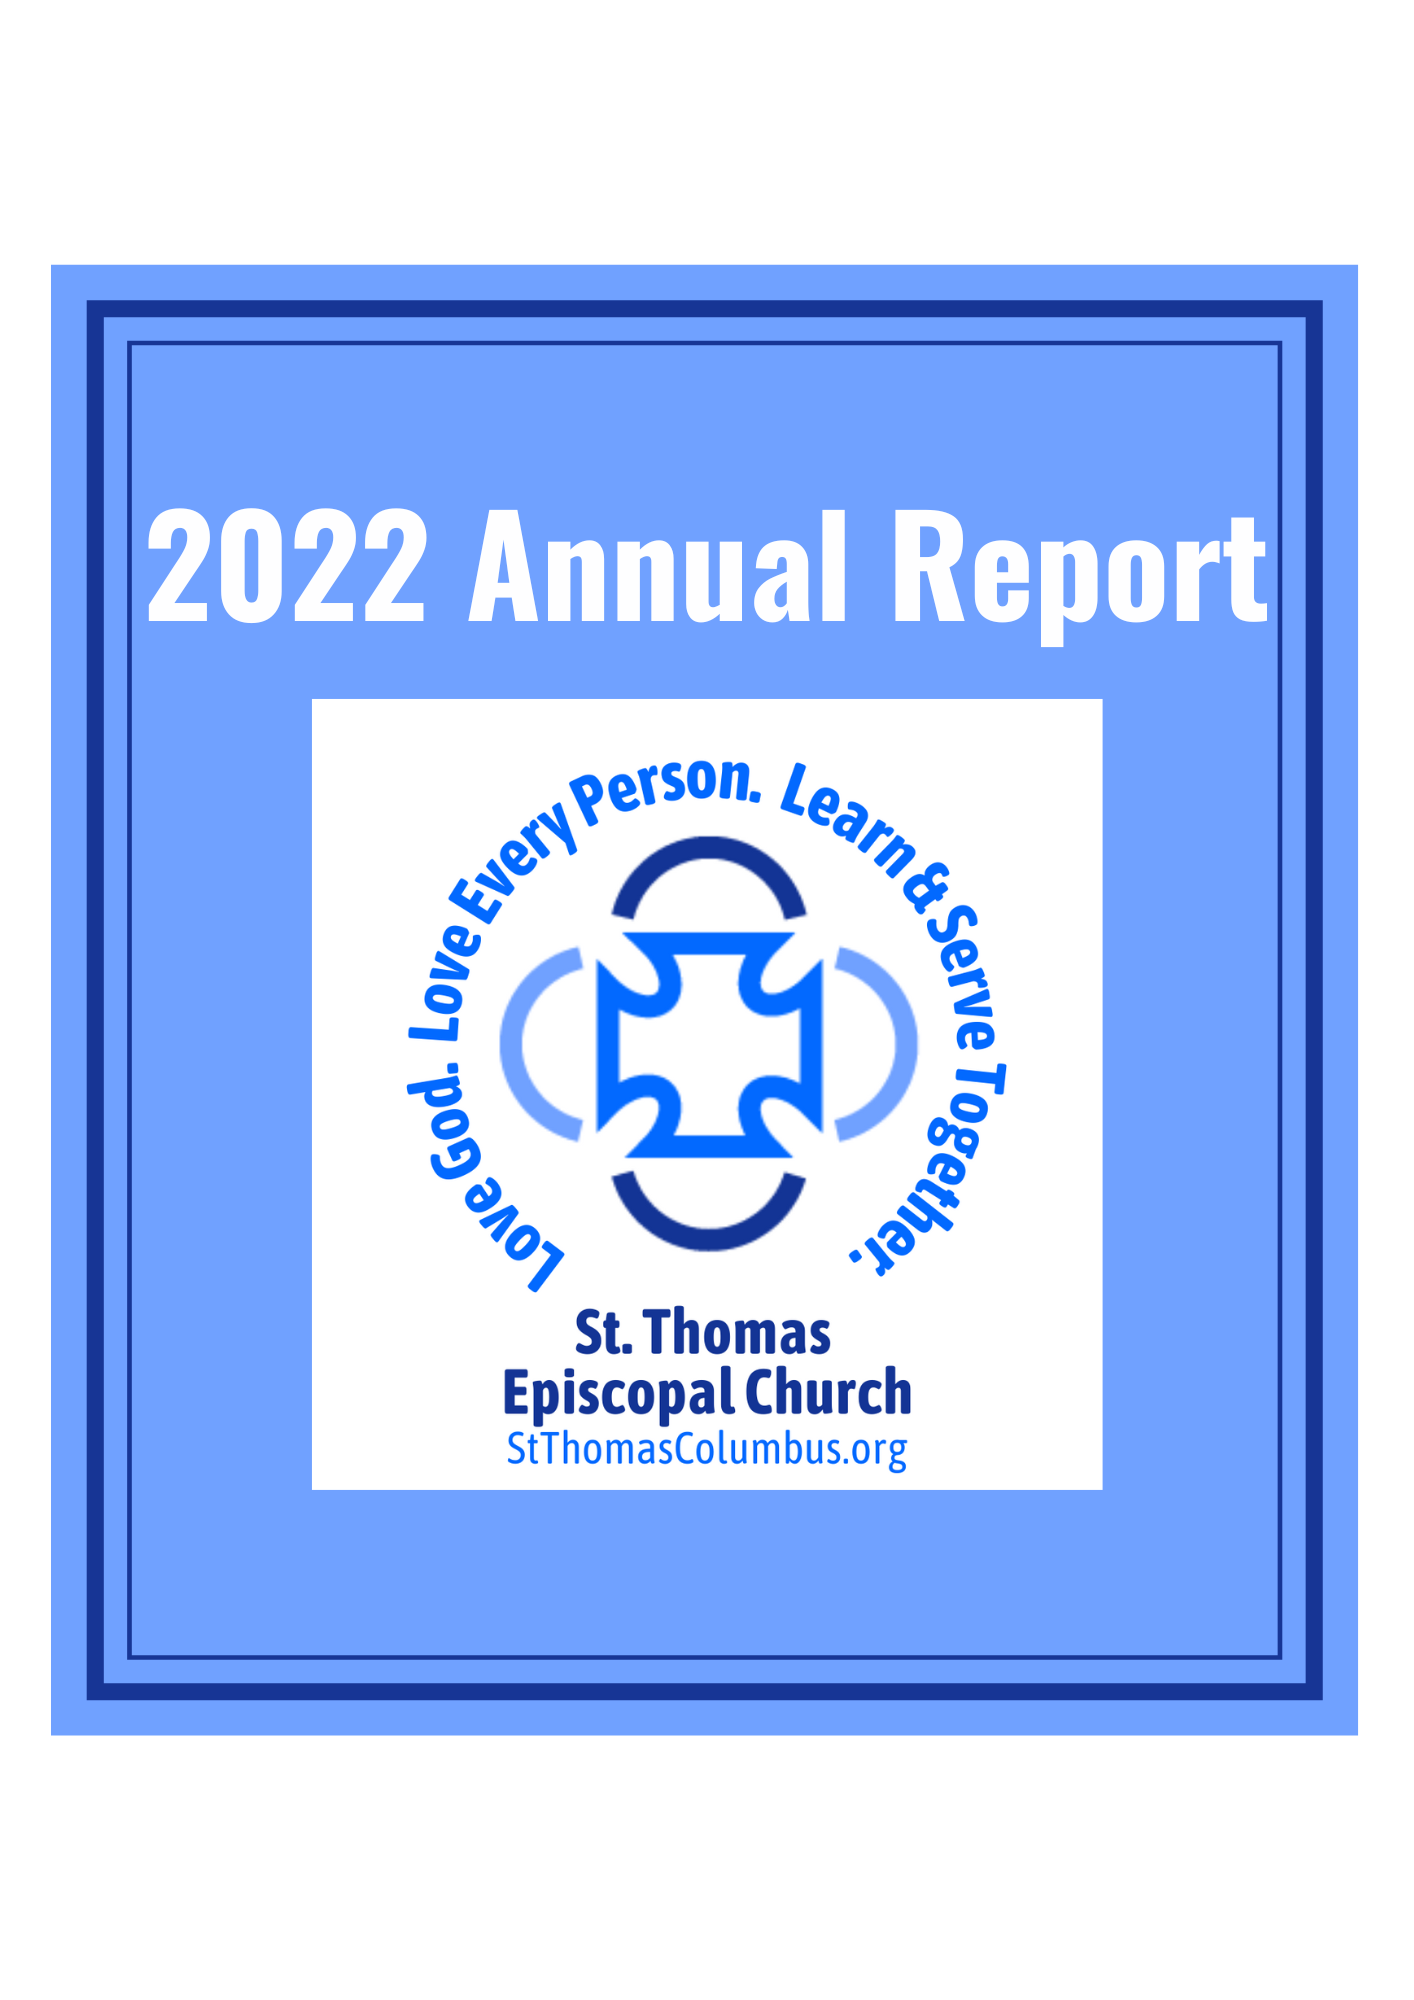 2022-long-version-annual-report-1_173